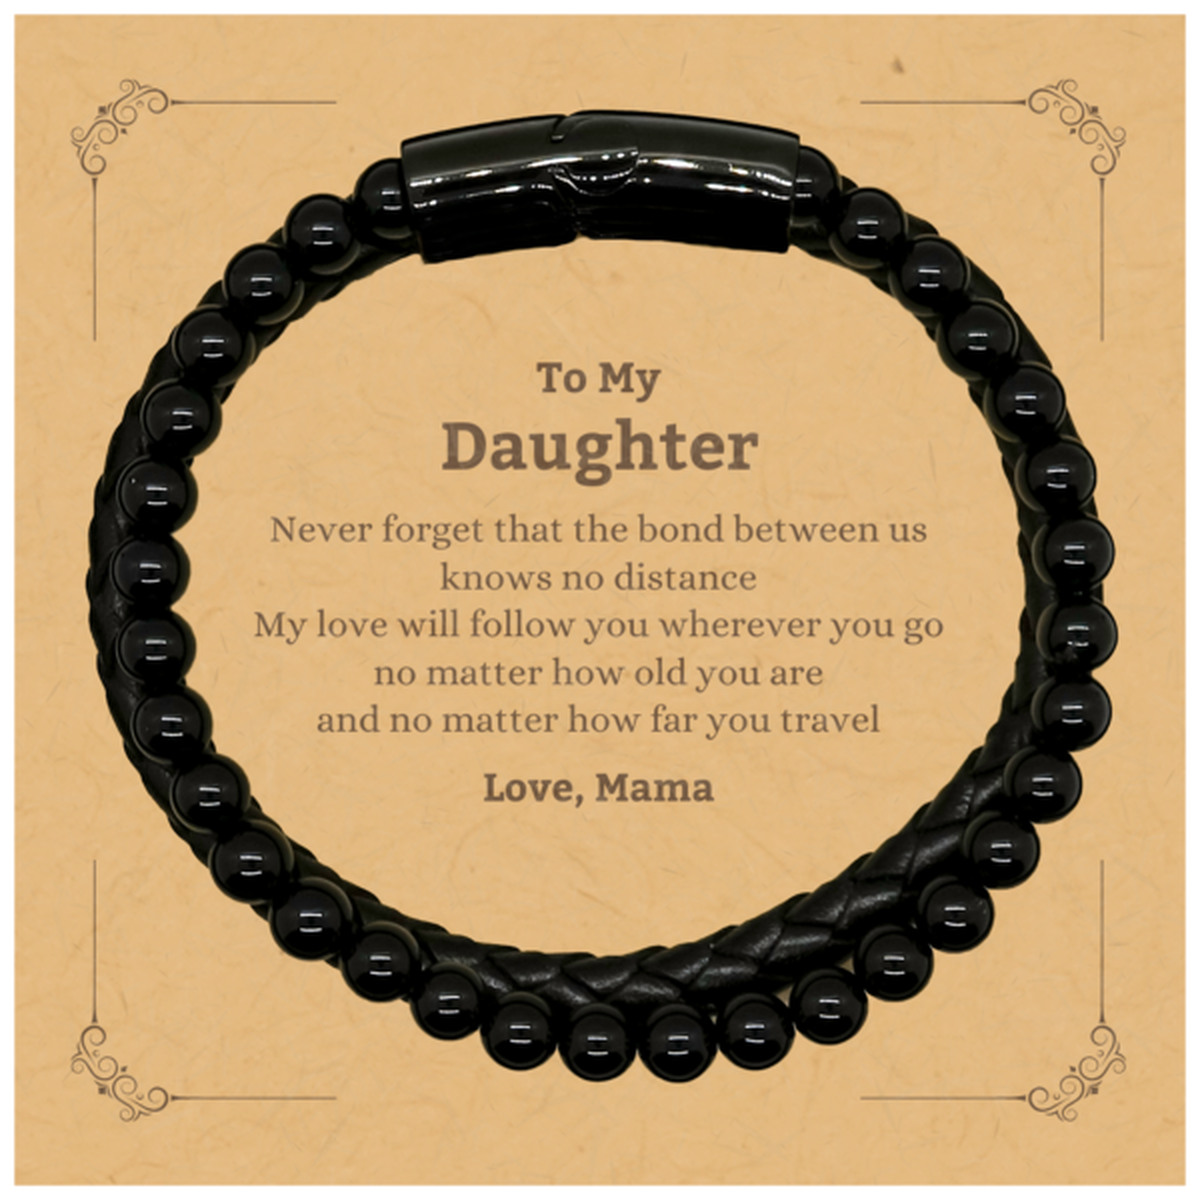 Daughter Birthday Gifts from Mama, Adjustable Stone Leather Bracelets for Daughter Christmas Graduation Unique Gifts Daughter Never forget that the bond between us knows no distance. Love, Mama